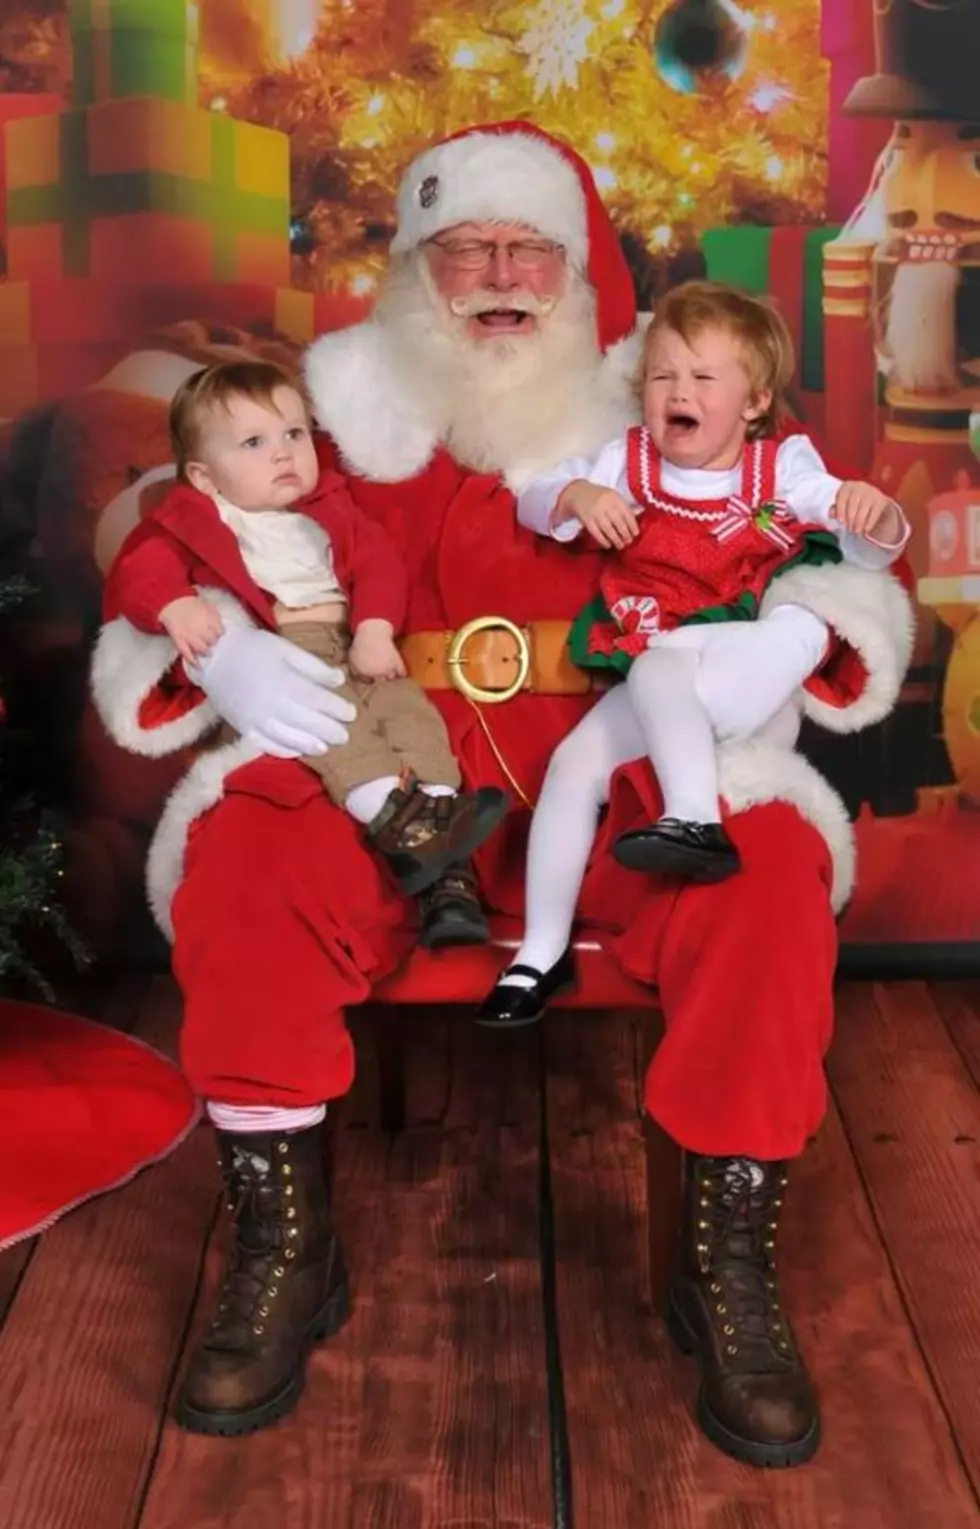 Prepare Your Kids Yakima – They Won't Be On Santa's Lap This Year